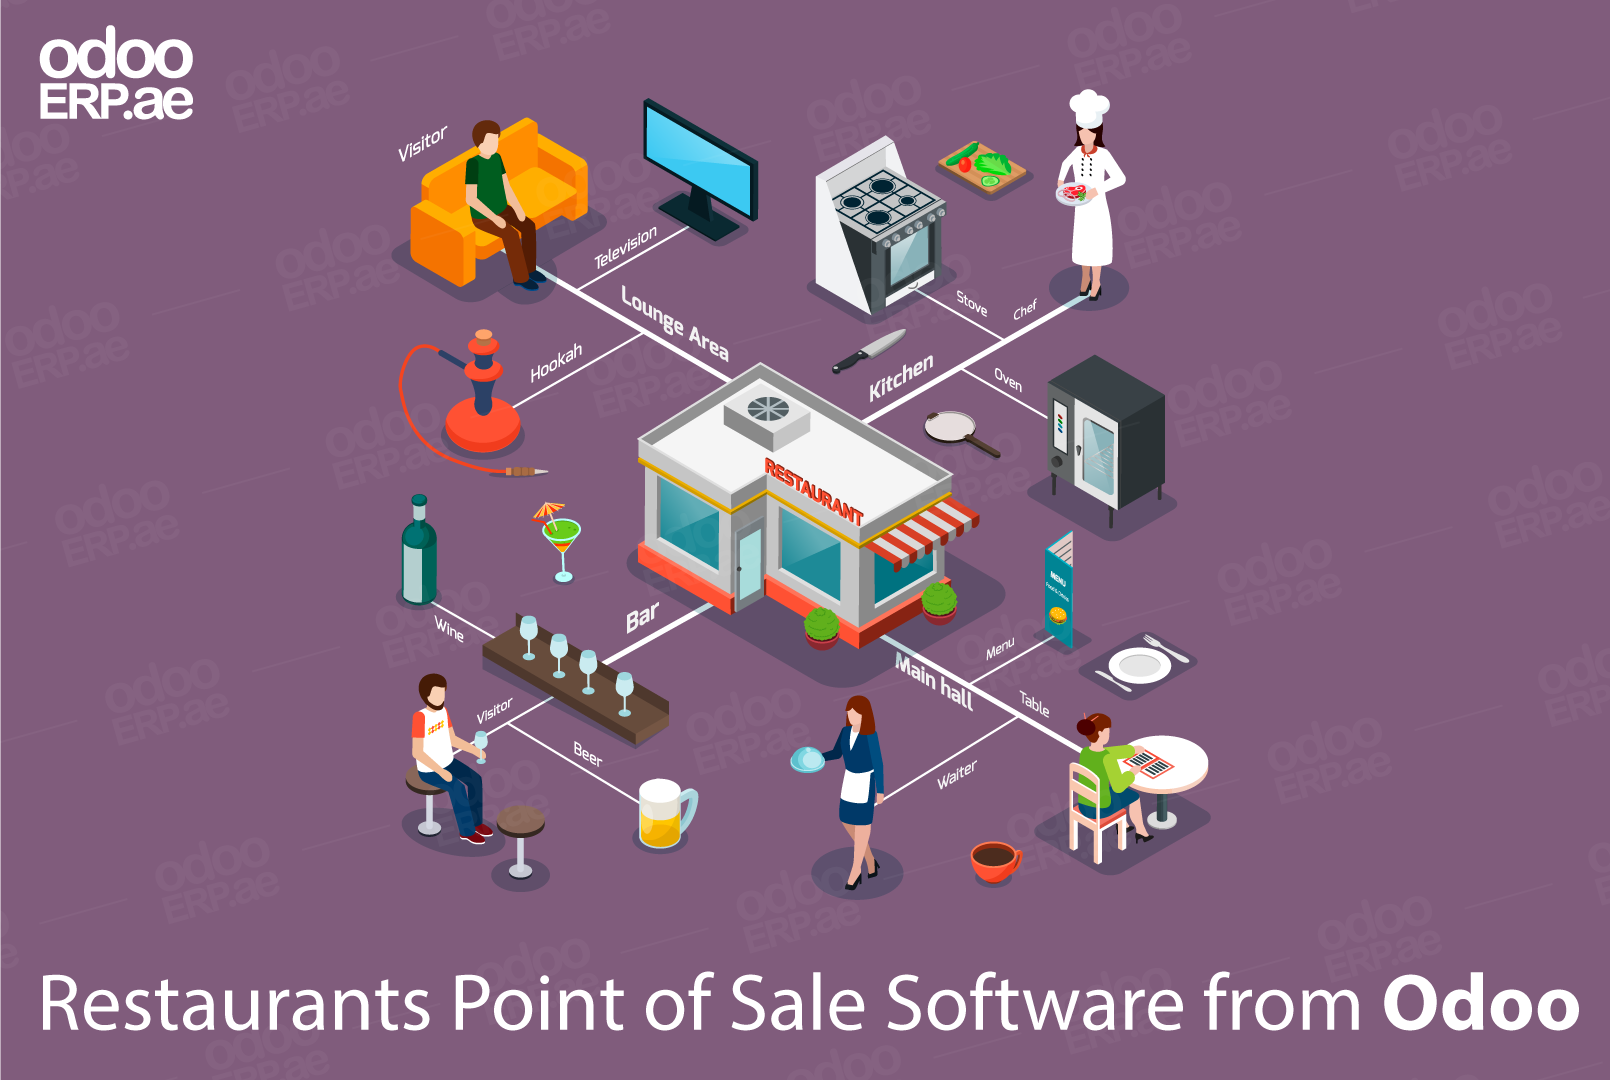 Restaurants Point of Sale (POS) System from Odoo ERP System